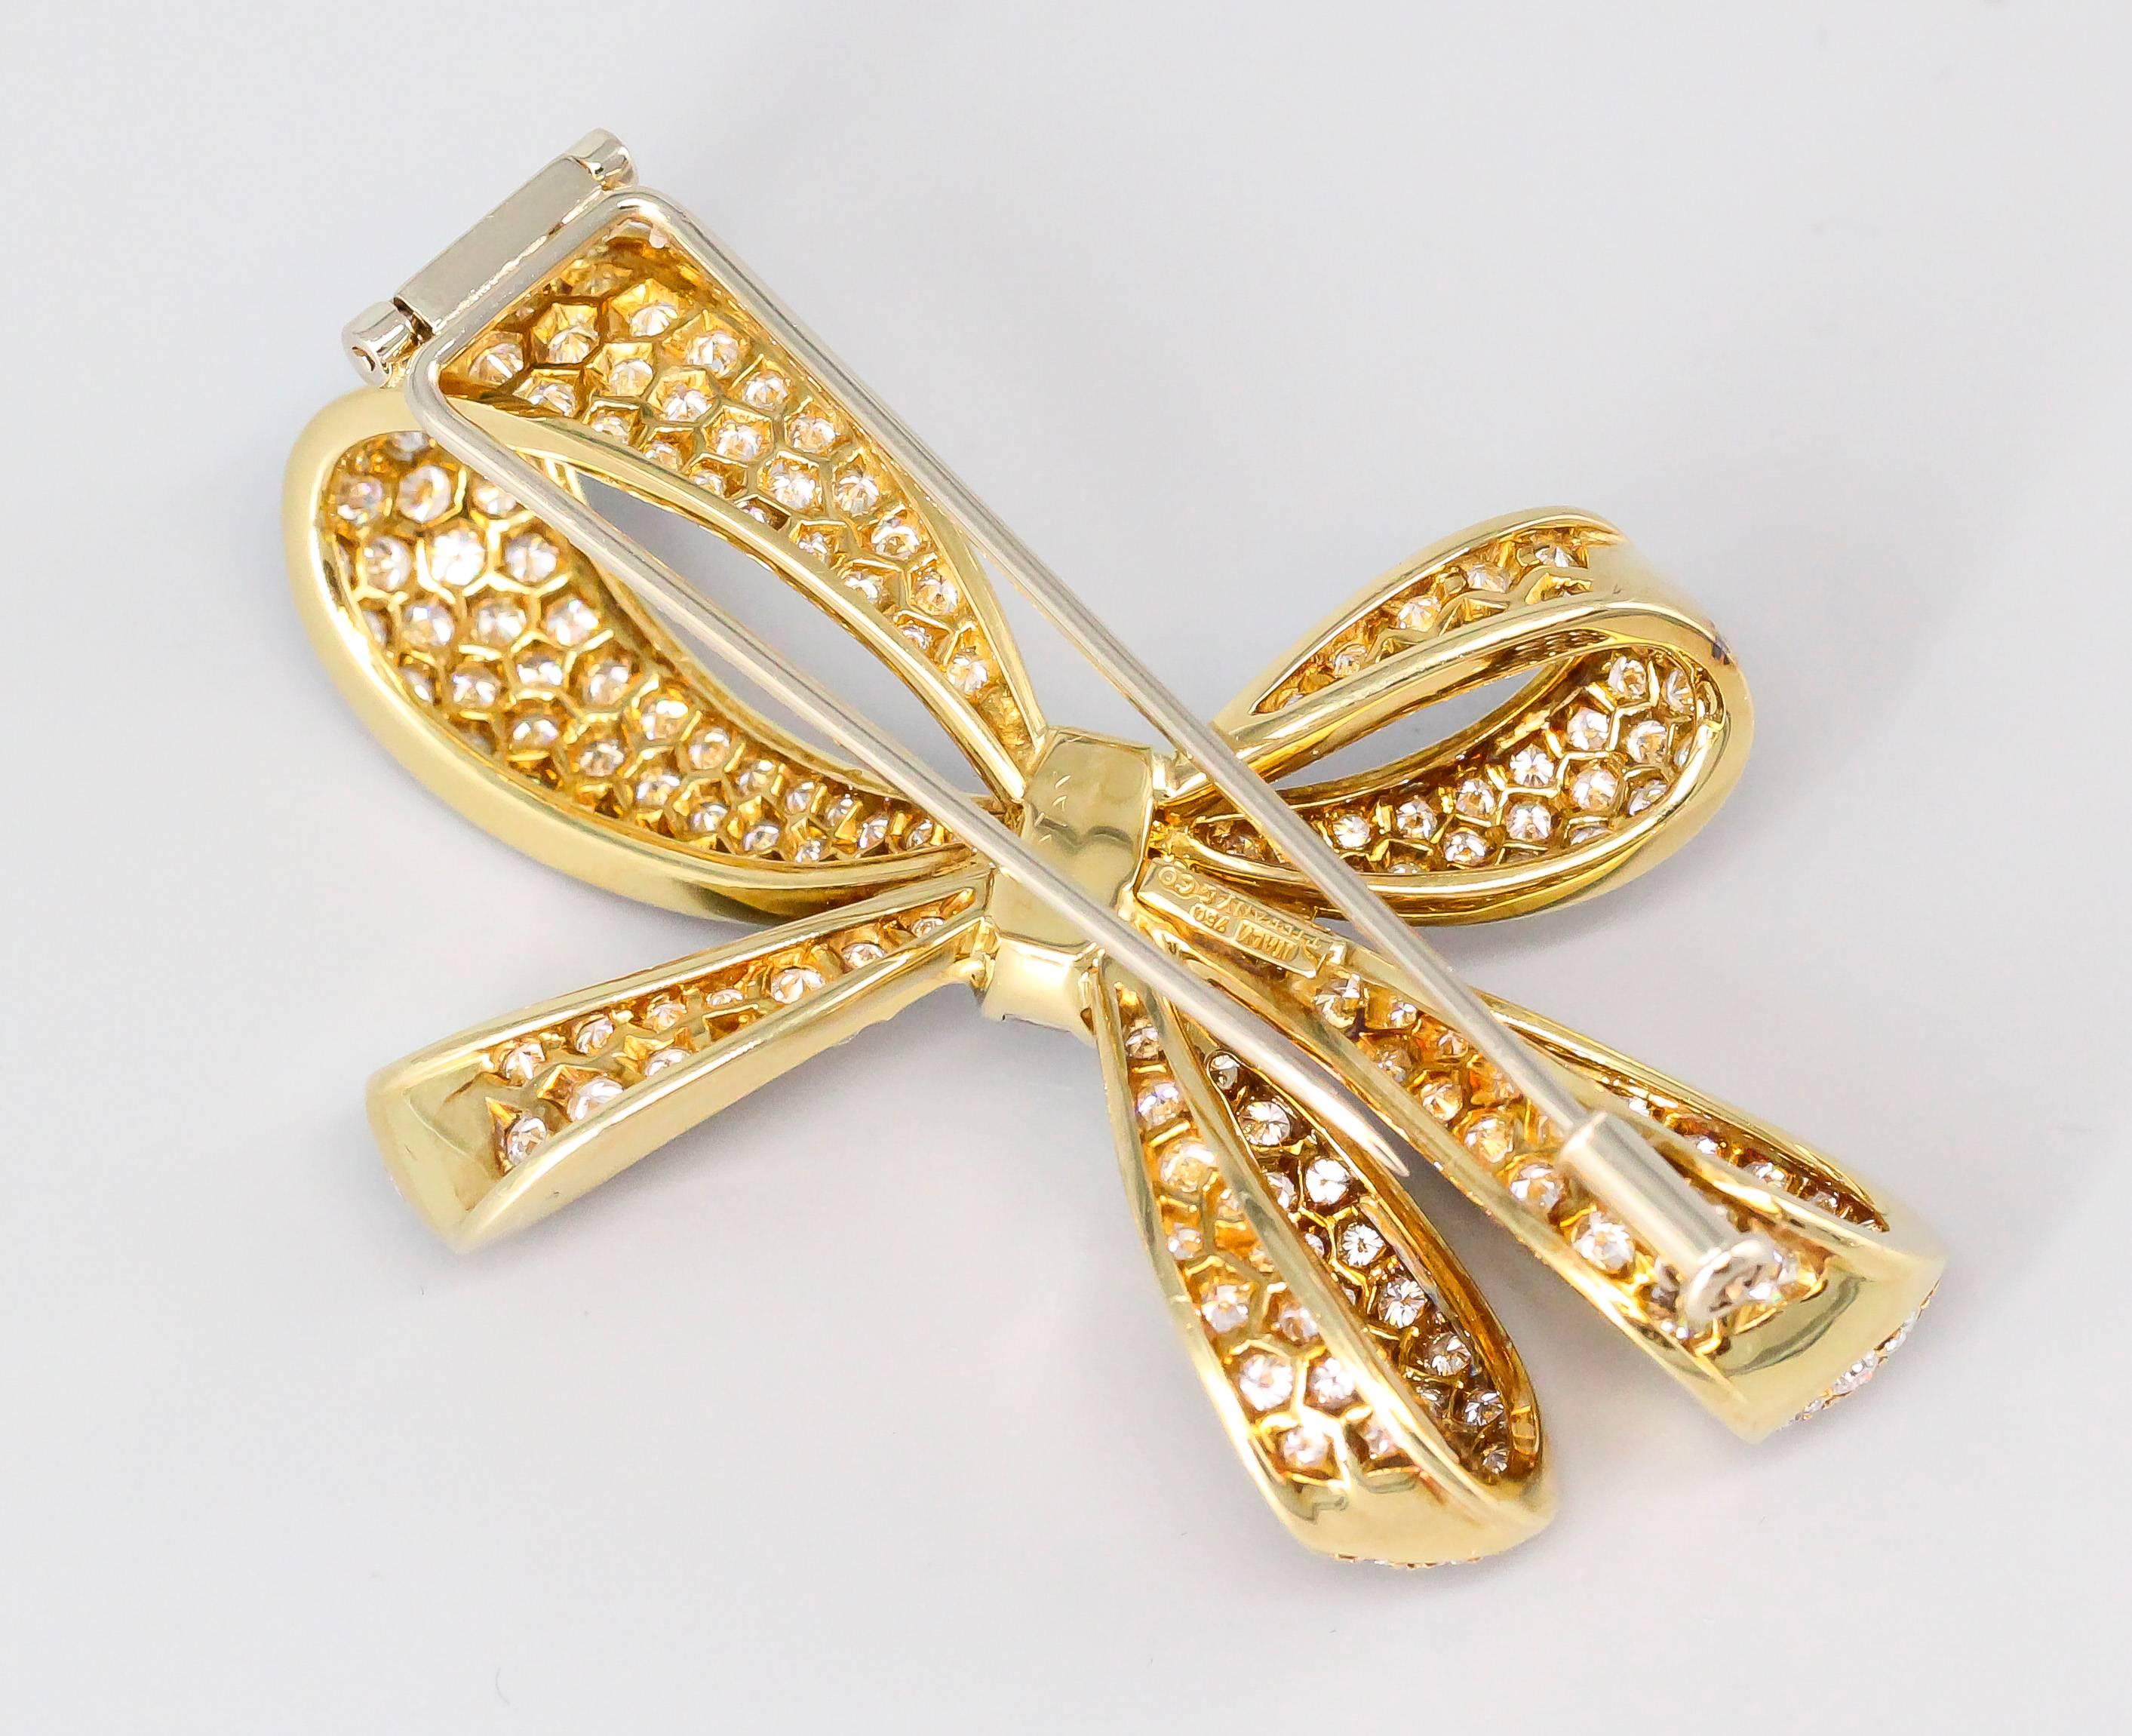 Elegant pave set diamond and 18K yellow gold brooch by Tiffany & Co. This beautifully made brooch features very high grade round brilliant cut diamonds in a pave setting and centers on a baguette cut diamond encrusted knot. Approx. 6.0 carats of